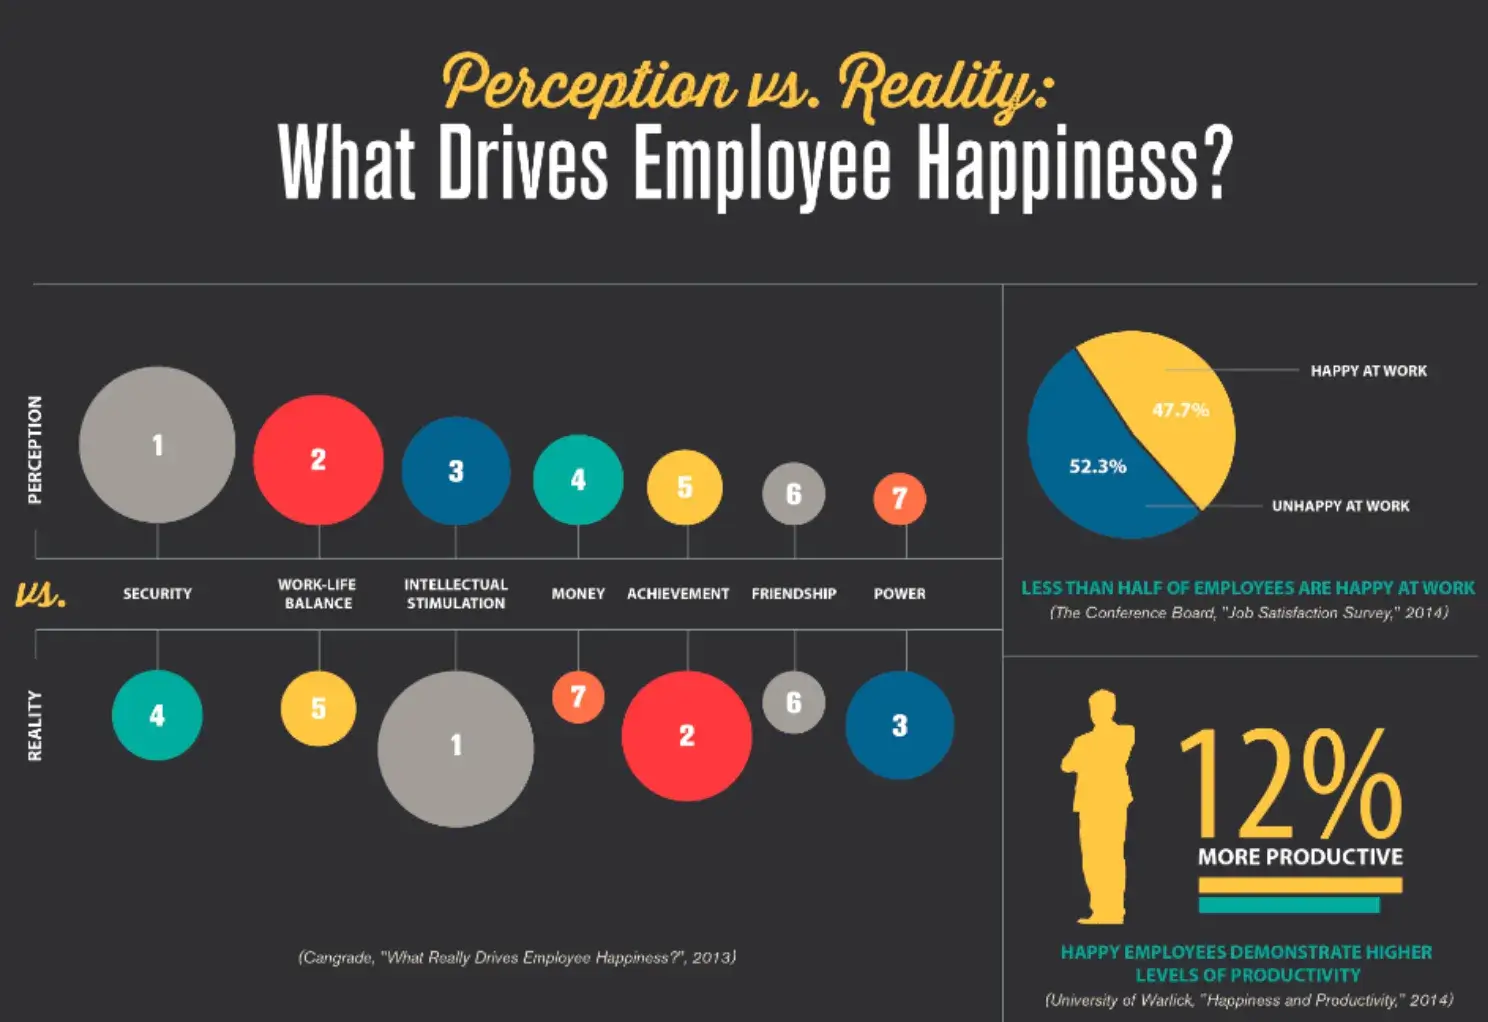 perception vs. reality: what drives employee happiness